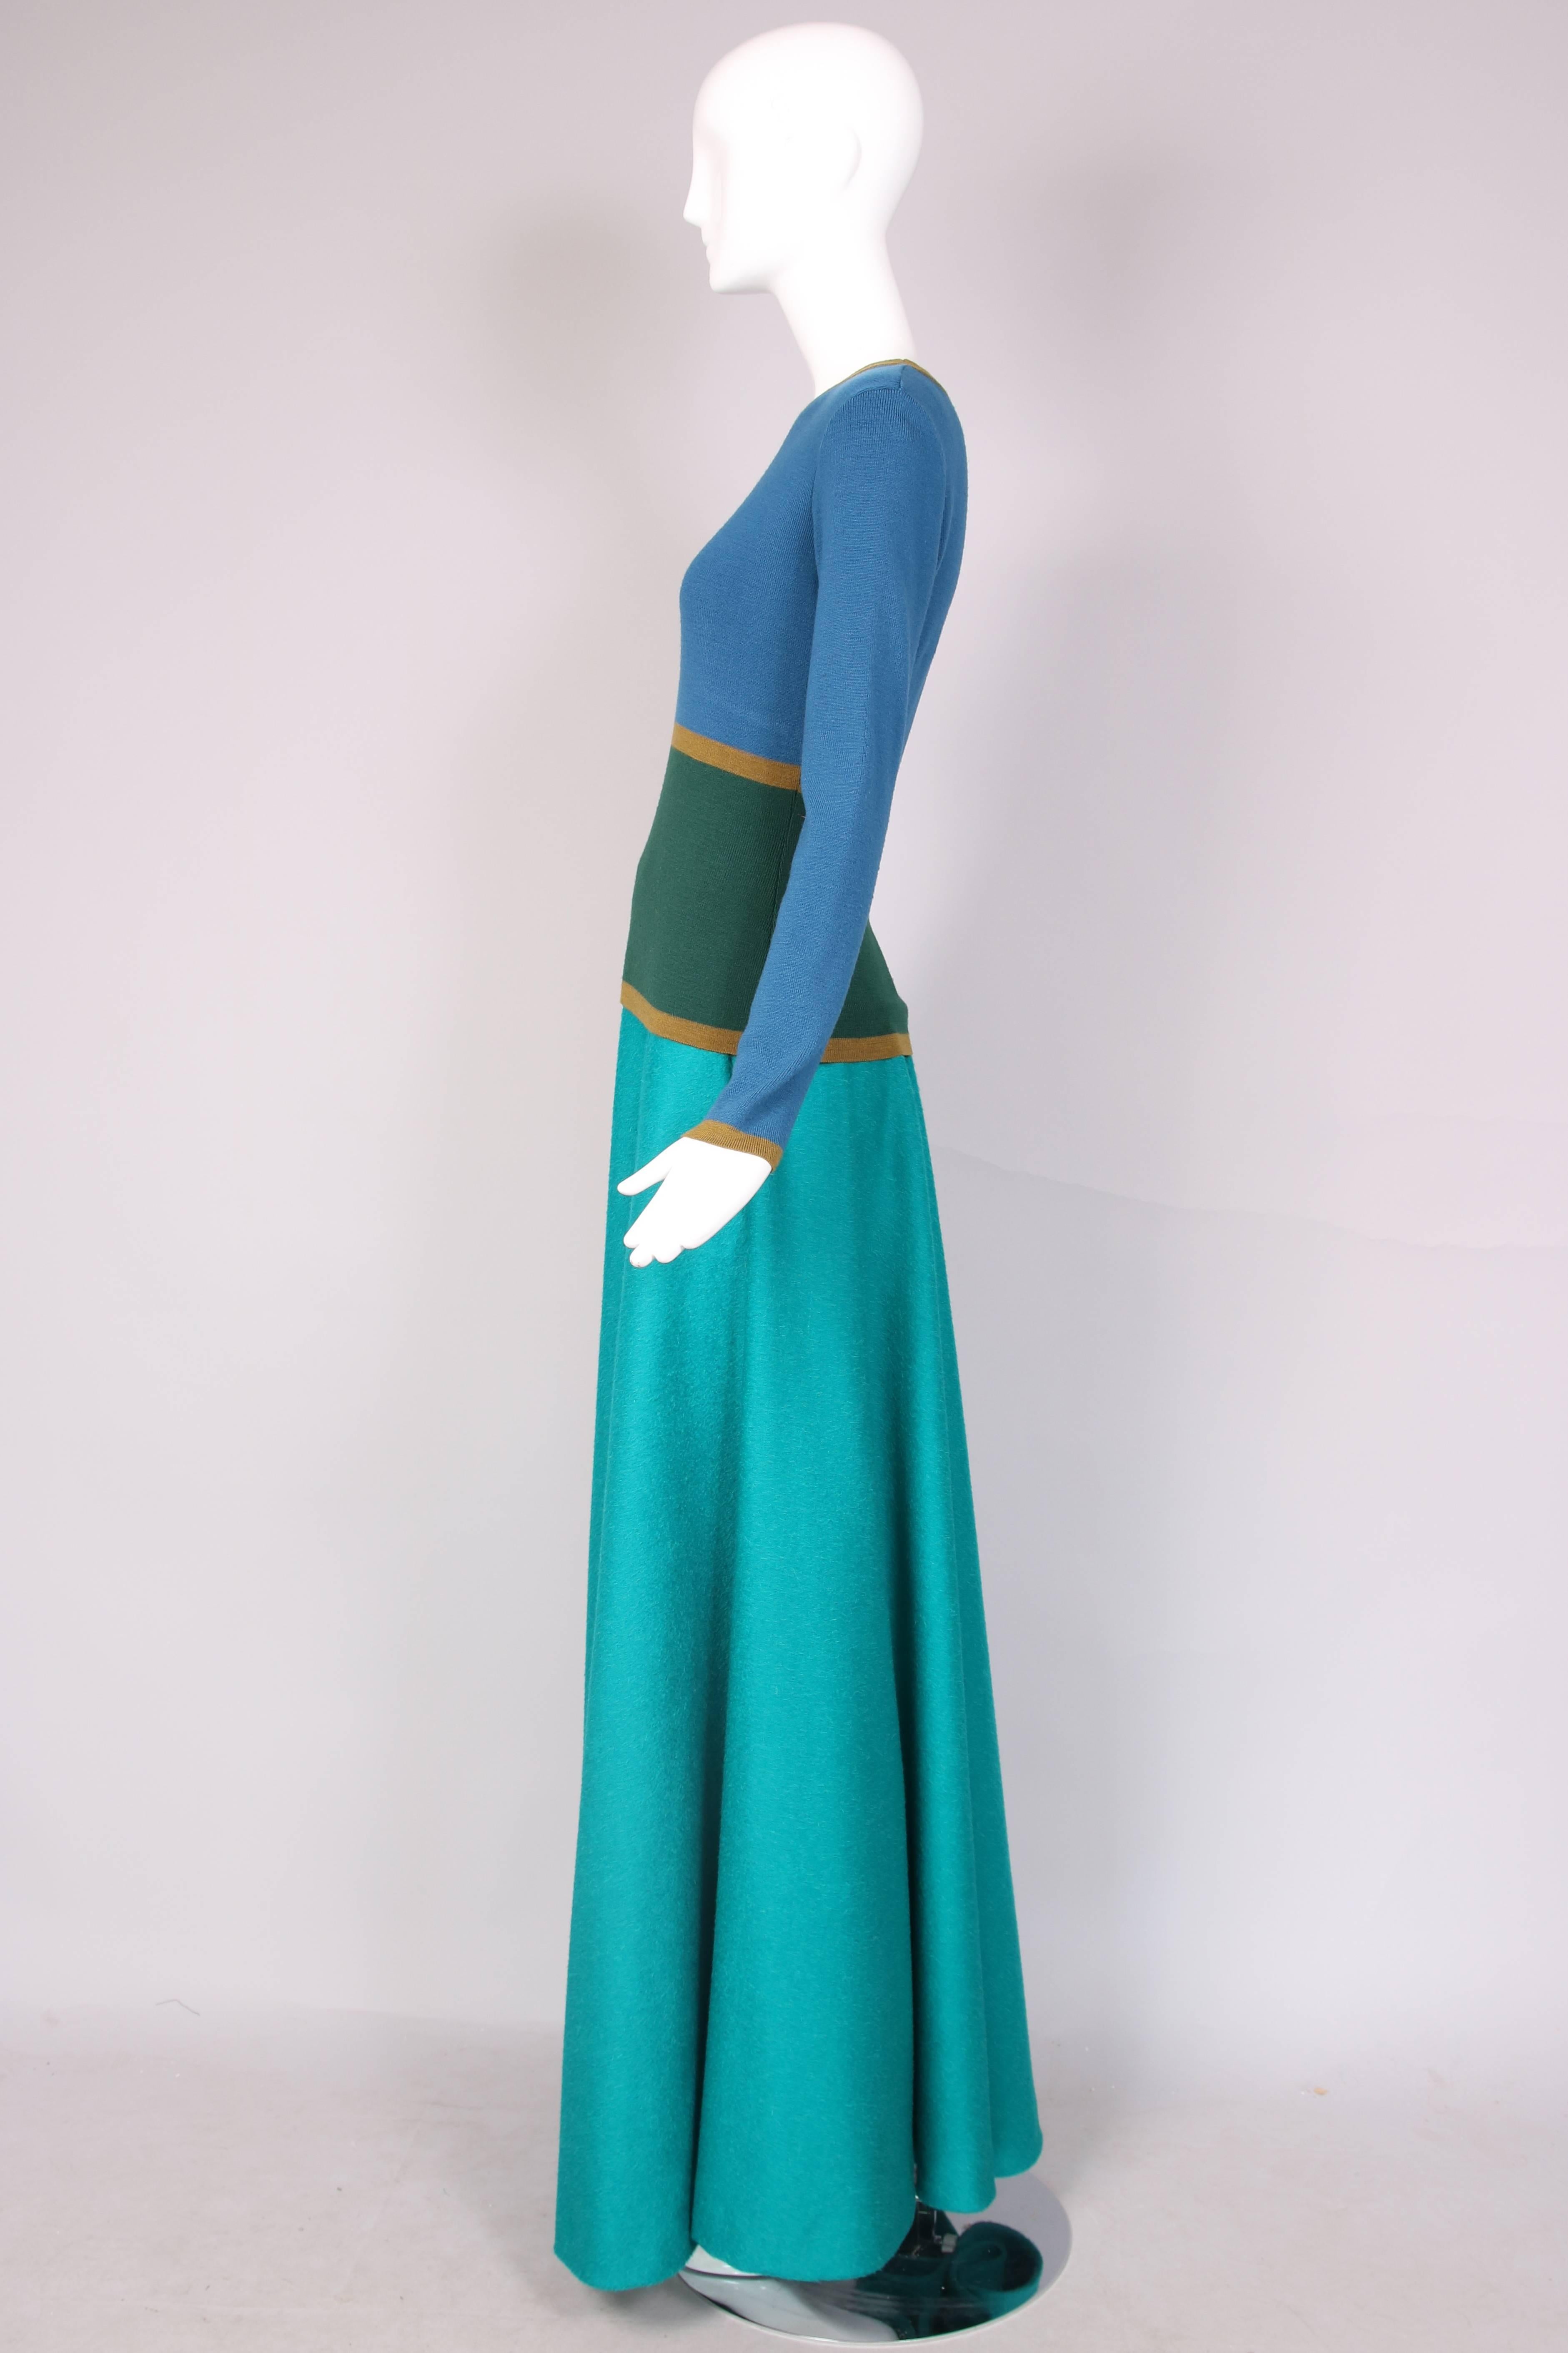 Yves Saint Laurent green & blue long sleeve lambswool sweater and teal blue alpaca wool full maxi skirt ensemble. In excellent condition. Sweater is a size 40, skirt is unlabeled.
MEASUREMENTS:
Sweater
Shoulders - 15